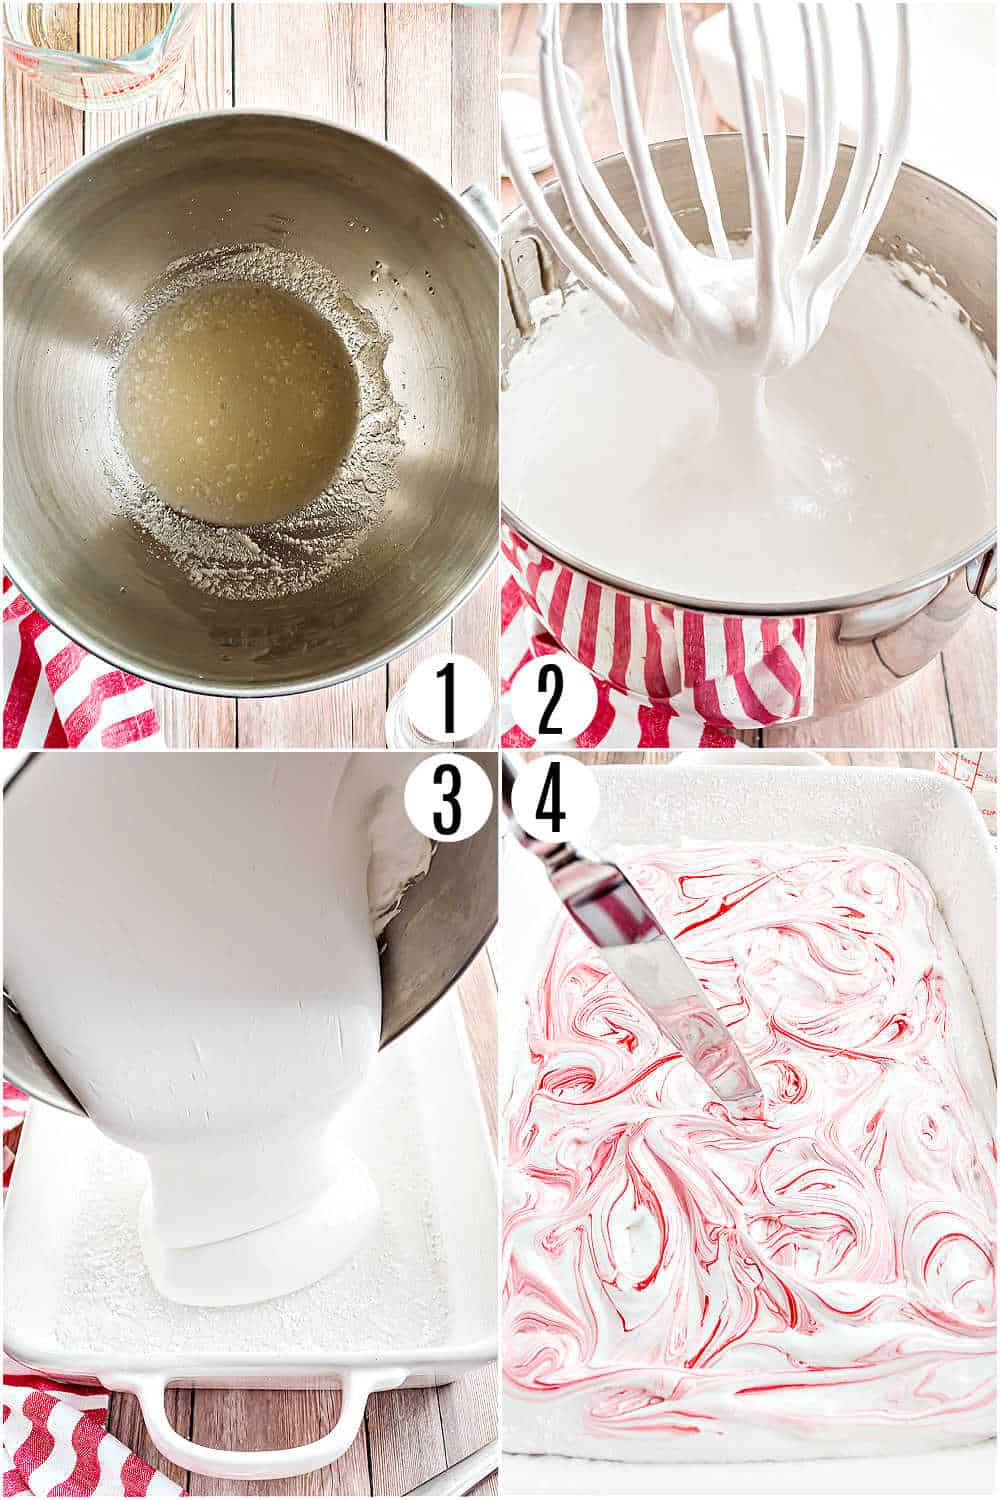 Step by step photos showing how to make peppermint marshmallows.